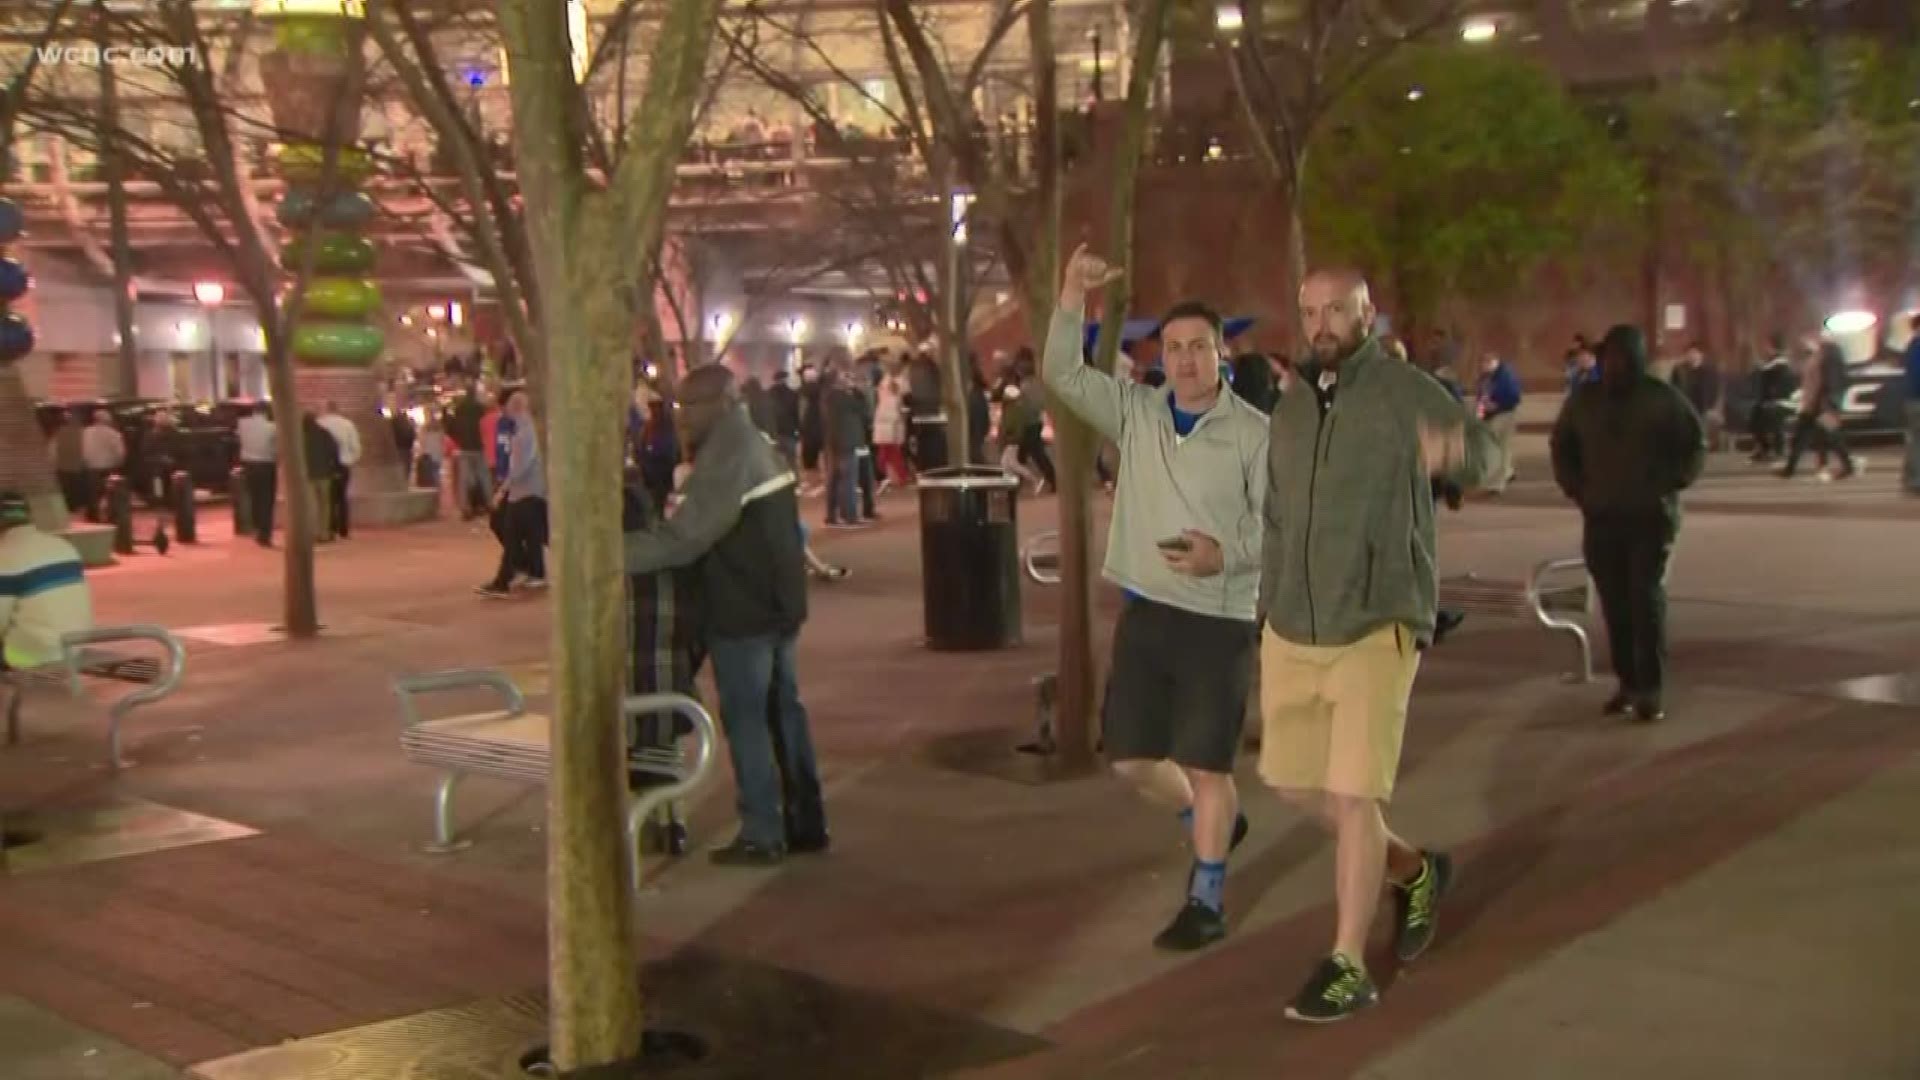 The ACC Championship and St. Patrick's Day weekend brought tens of thousands to uptown Charlotte for the festivities.